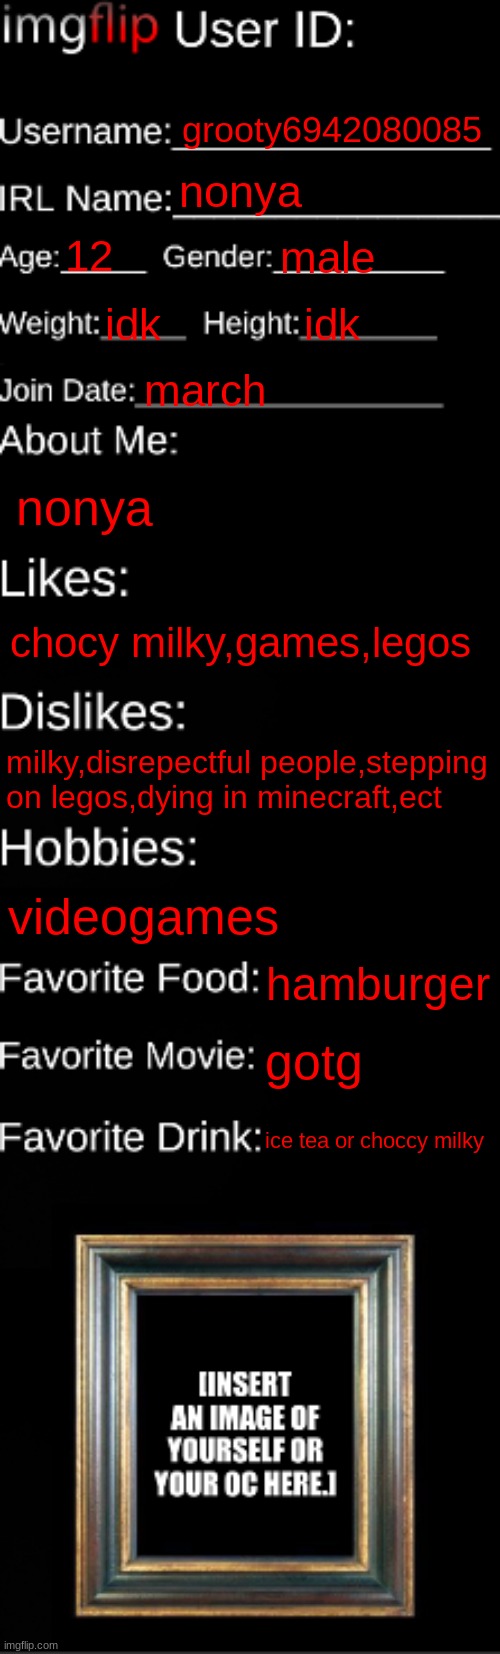 me | grooty6942080085; nonya; 12; male; idk; idk; march; nonya; chocy milky,games,legos; milky,disrepectful people,stepping on legos,dying in minecraft,ect; videogames; hamburger; gotg; ice tea or choccy milky | image tagged in imgflip id card | made w/ Imgflip meme maker